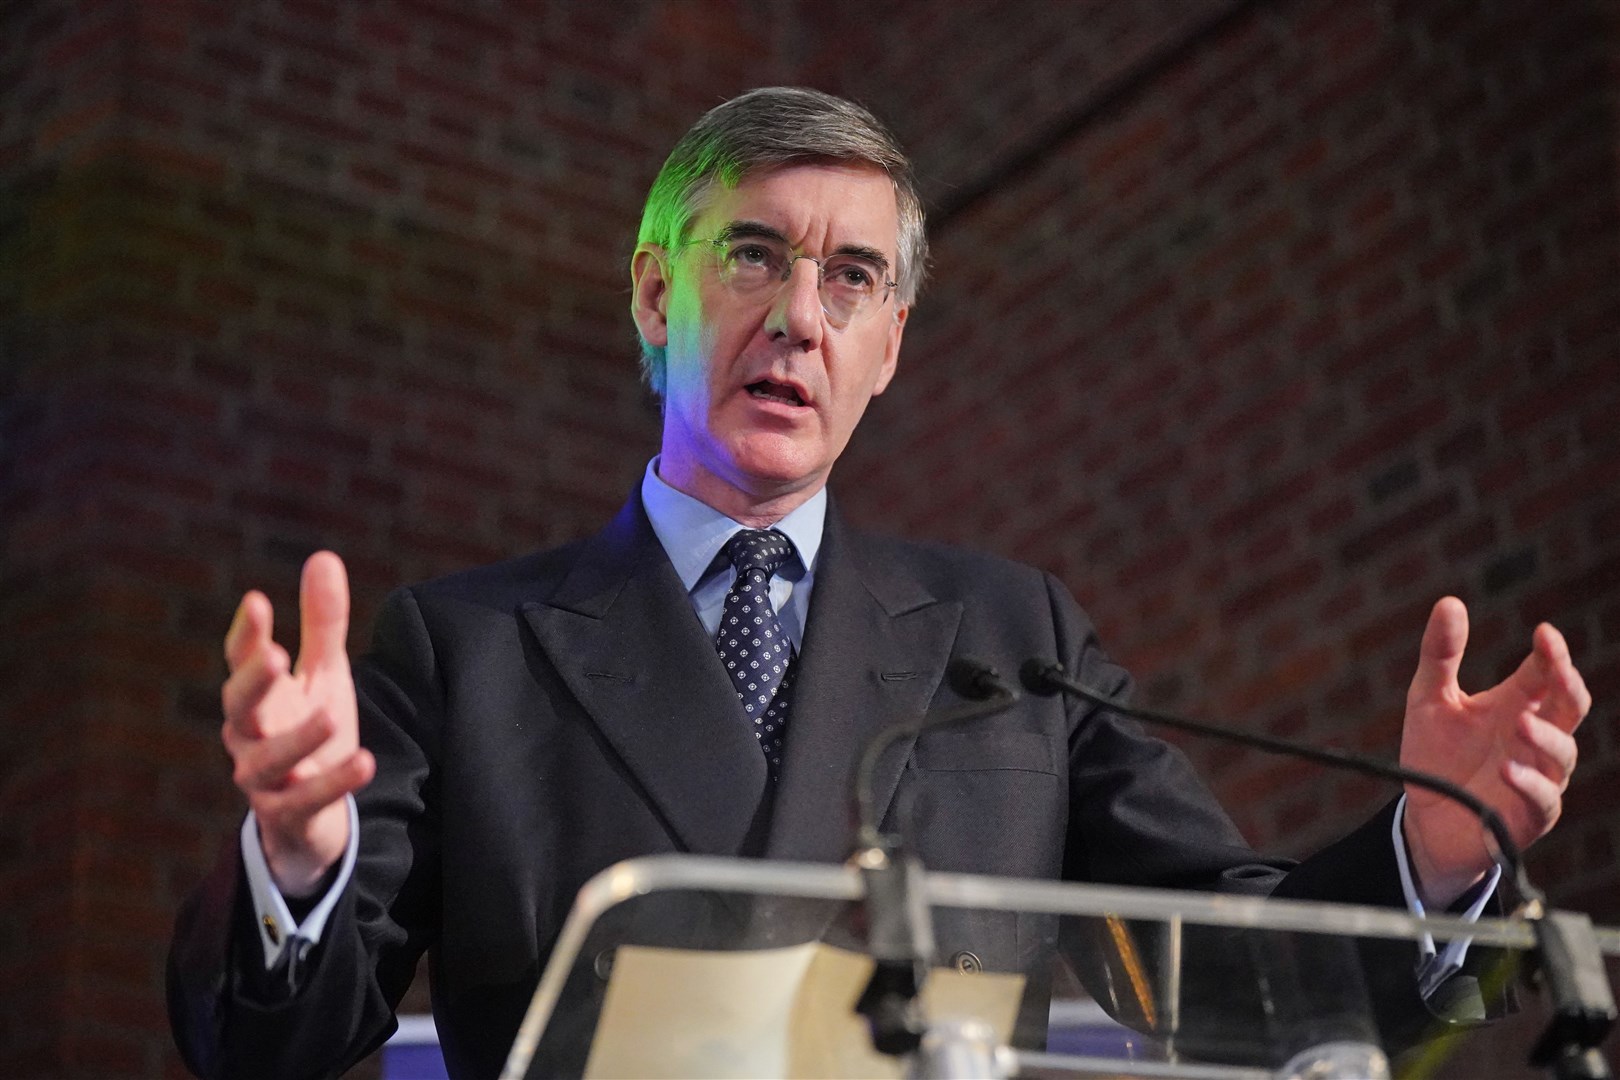 Sir Jacob Rees-Mogg told the rally the ‘age of Davos man is over’ (Victoria Jones/PA)